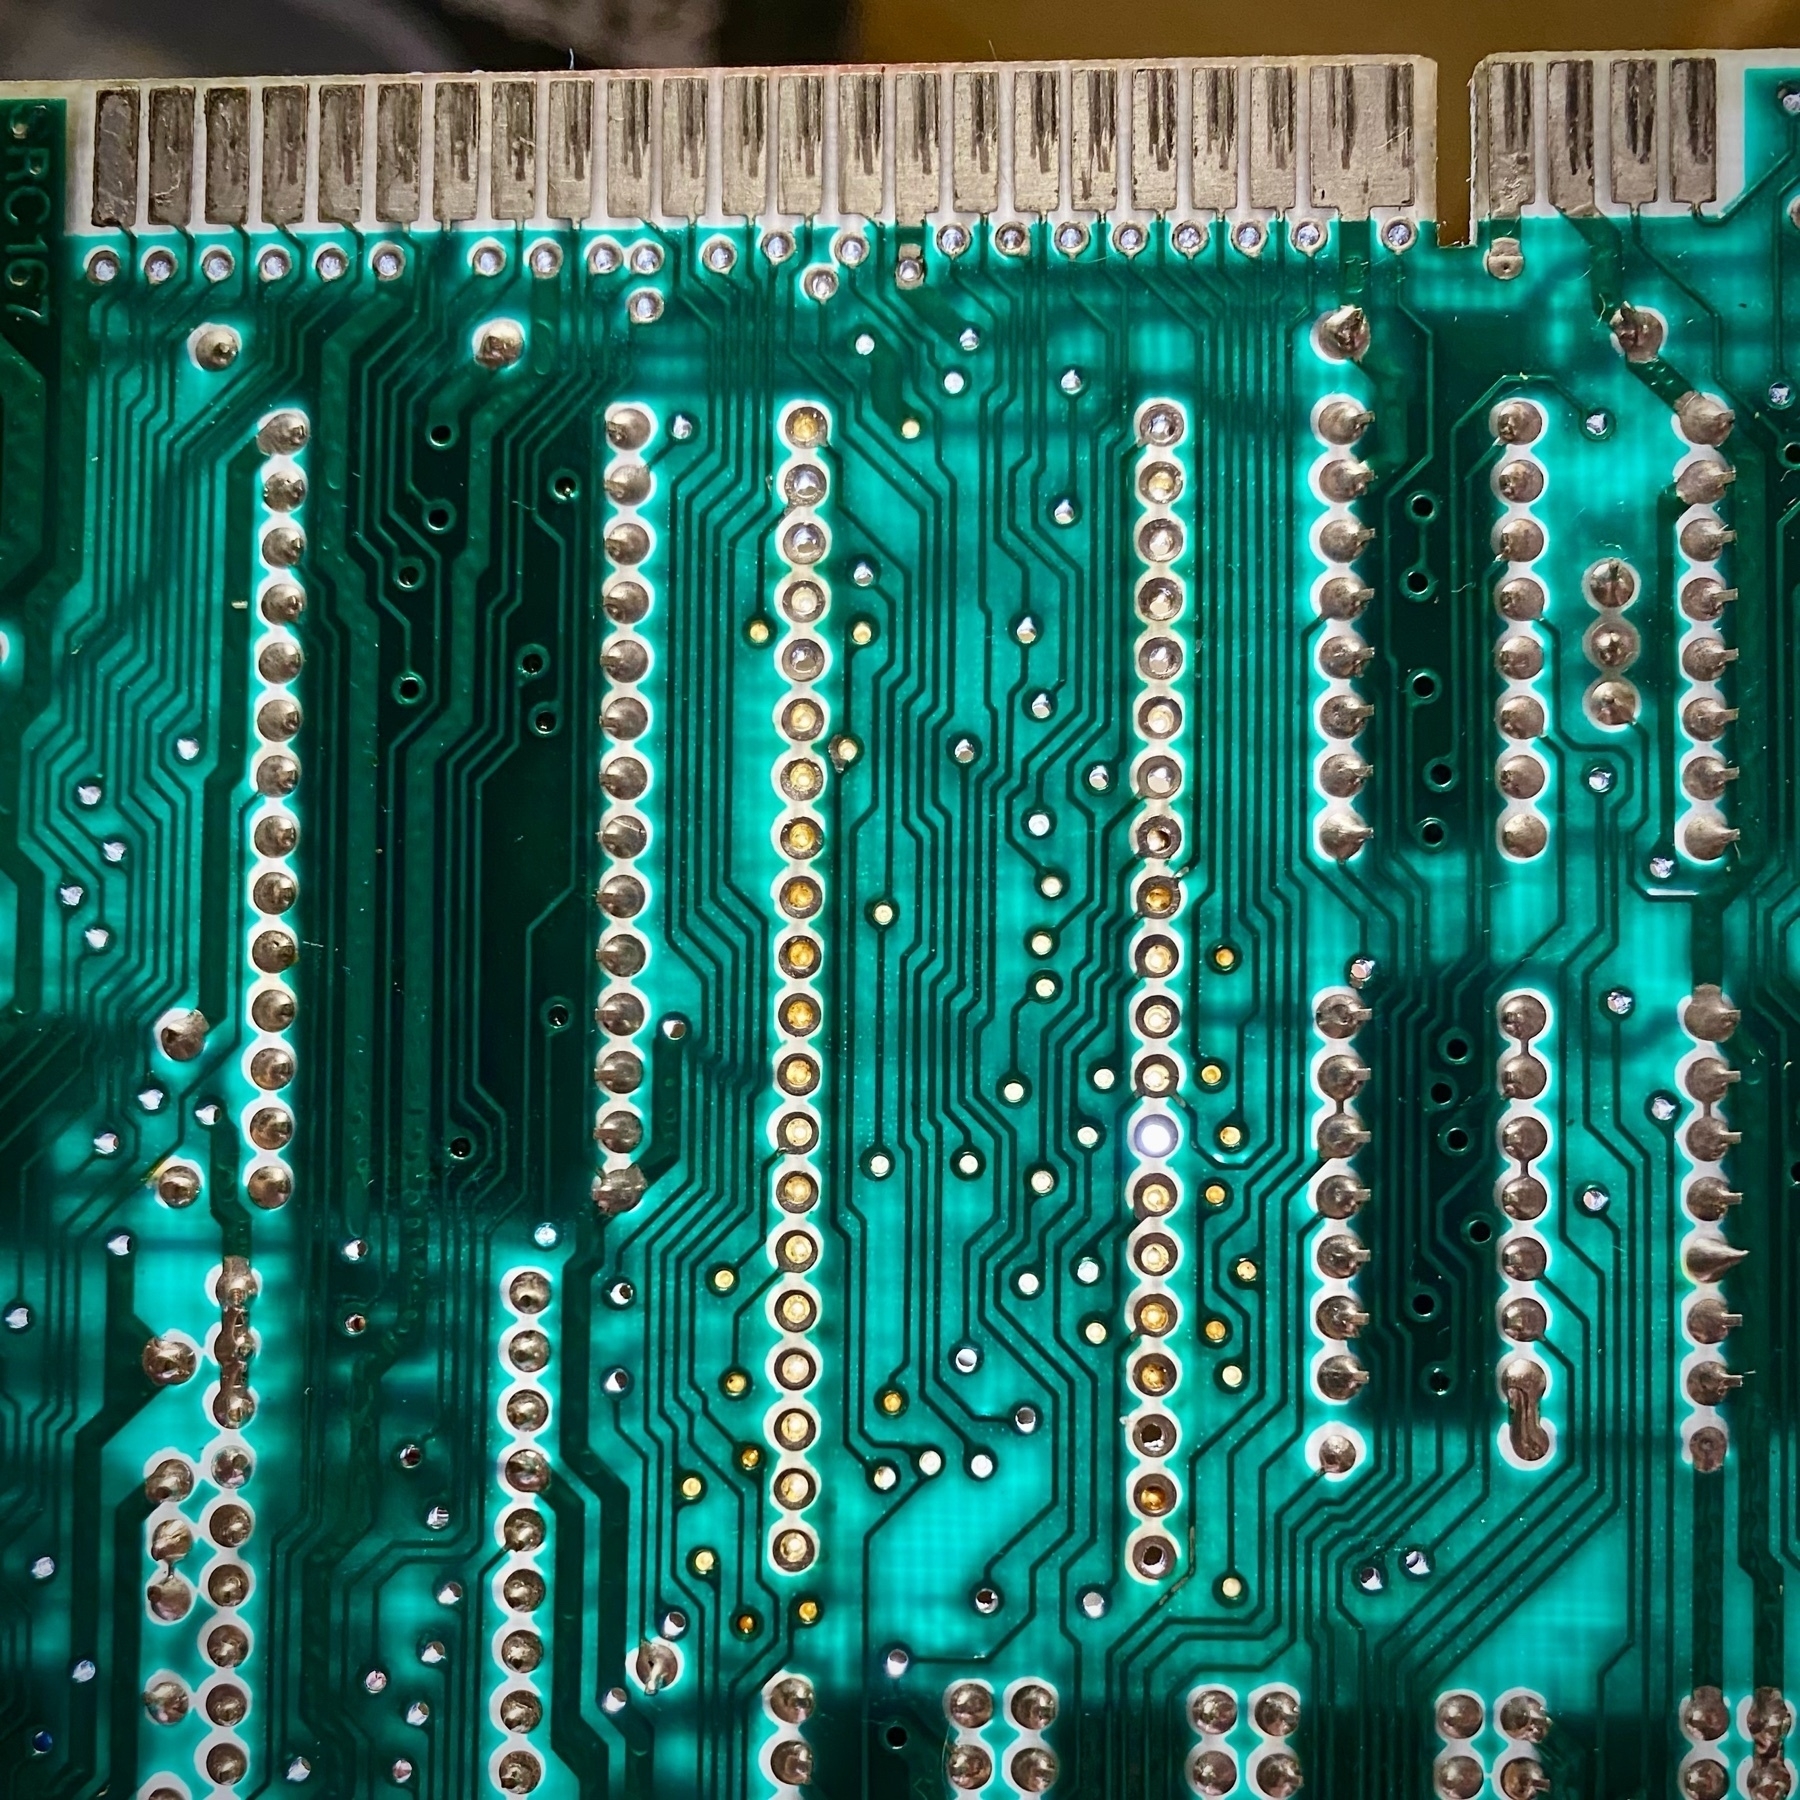 underside of the Spectrum board showing the empty through-holes where the Z80 used to be